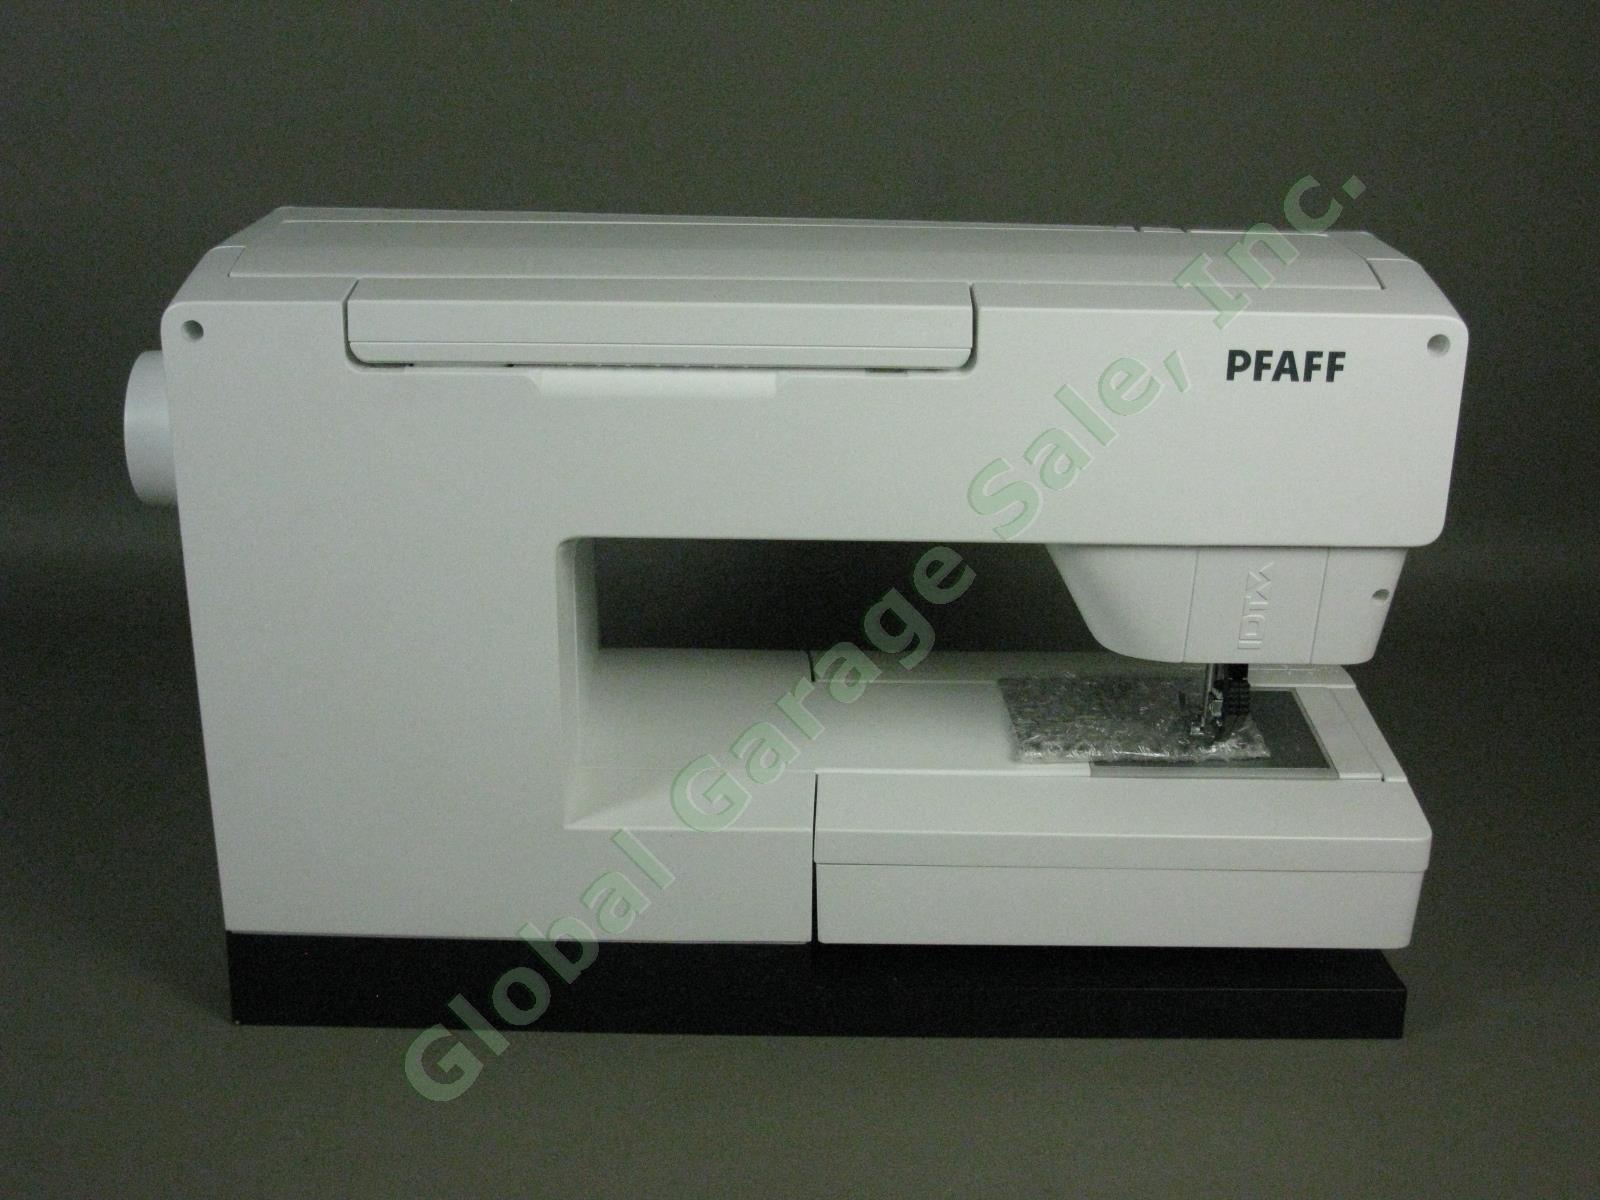 Pfaff Creative Sensation Pro Sewing/Embroidery Machine 1 Owner Exc Cond Serviced 8